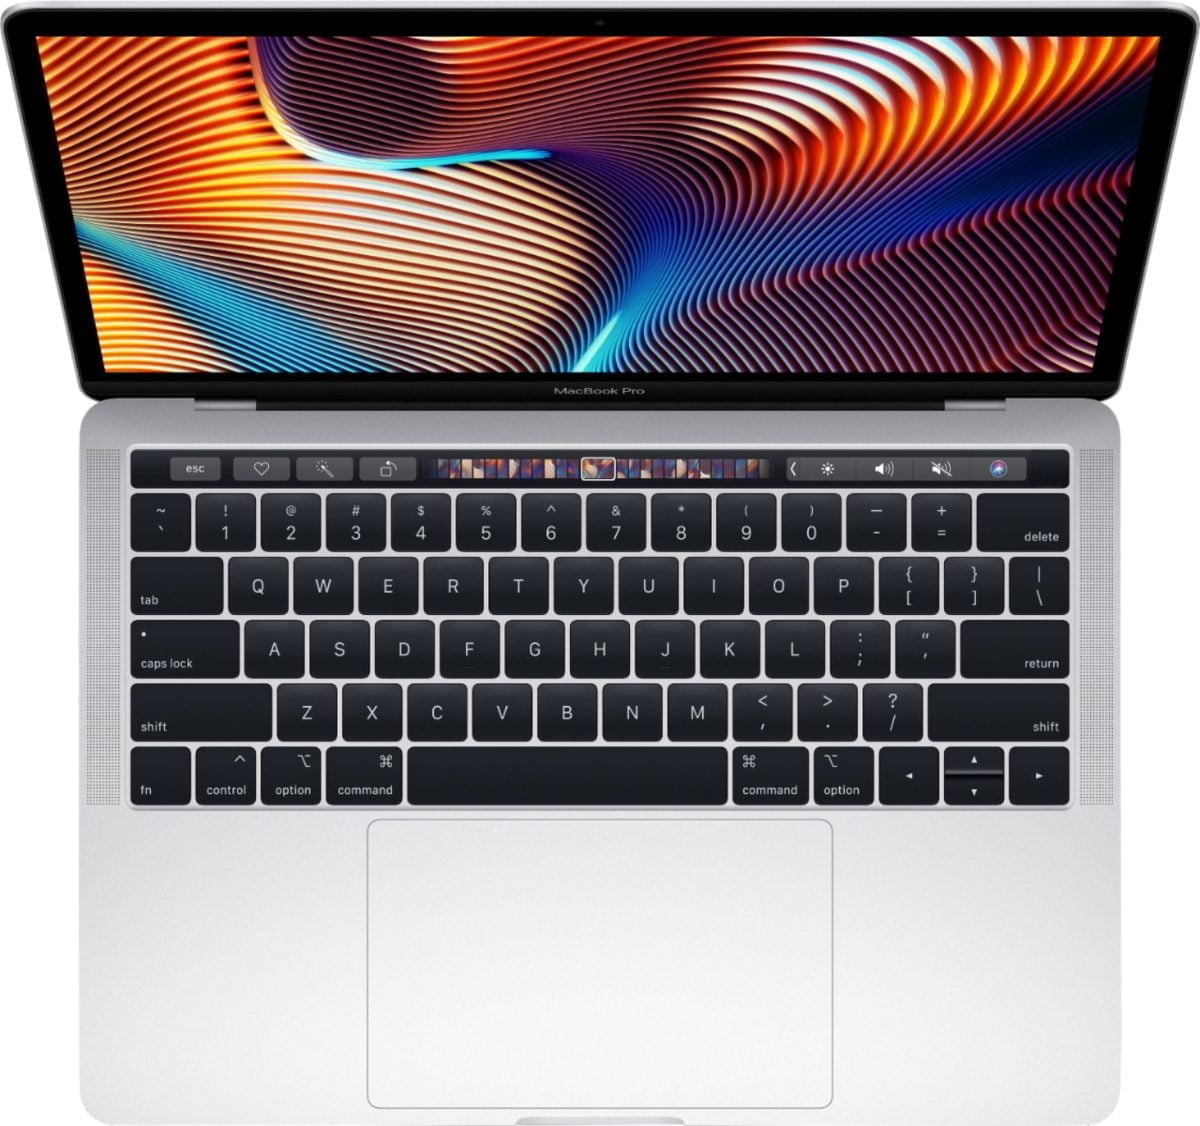 S Scaled Apple &Lt;H1 Id=&Quot;Title&Quot; Class=&Quot;A-Size-Large A-Spacing-None&Quot;&Gt;Macbook Pro 13.3&Quot; Laptop - Apple M1 Chip - 8Gb Memory - 512Gb Ssd (Latest Model) - Silver&Lt;/H1&Gt; &Lt;P Class=&Quot;Heading-5 V-Fw-Regular Description-Heading&Quot;&Gt;&Lt;Span Style=&Quot;Color: #333333;Font-Size: 16Px&Quot;&Gt;The Apple M1 Chip Redefines The 13-Inch Macbook Pro. Featuring An 8-Core Cpu That Flies Through Complex Workflows In Photography, Coding, Video Editing, And More. Incredible 8-Core Gpu That Crushes Graphics-Intensive Tasks And Enables Super-Smooth Gaming. An Advanced 16-Core Neural Engine For More Machine Learning Power In Your Favorite Apps. Superfast Unified Memory For Fluid Performance. And The Longest-Ever Battery Life In A Mac At Up To 20 Hours.² It’s Apple'S Most Popular Pro Notebook. Way More Performance And Way More Pro.&Lt;/Span&Gt;&Lt;/P&Gt; Macbook Pro 13 Macbook Pro 13&Quot; Laptop - Apple M1 Chip - 8Gb Memory - 512Gb Ssd (Mydc2) - Silver